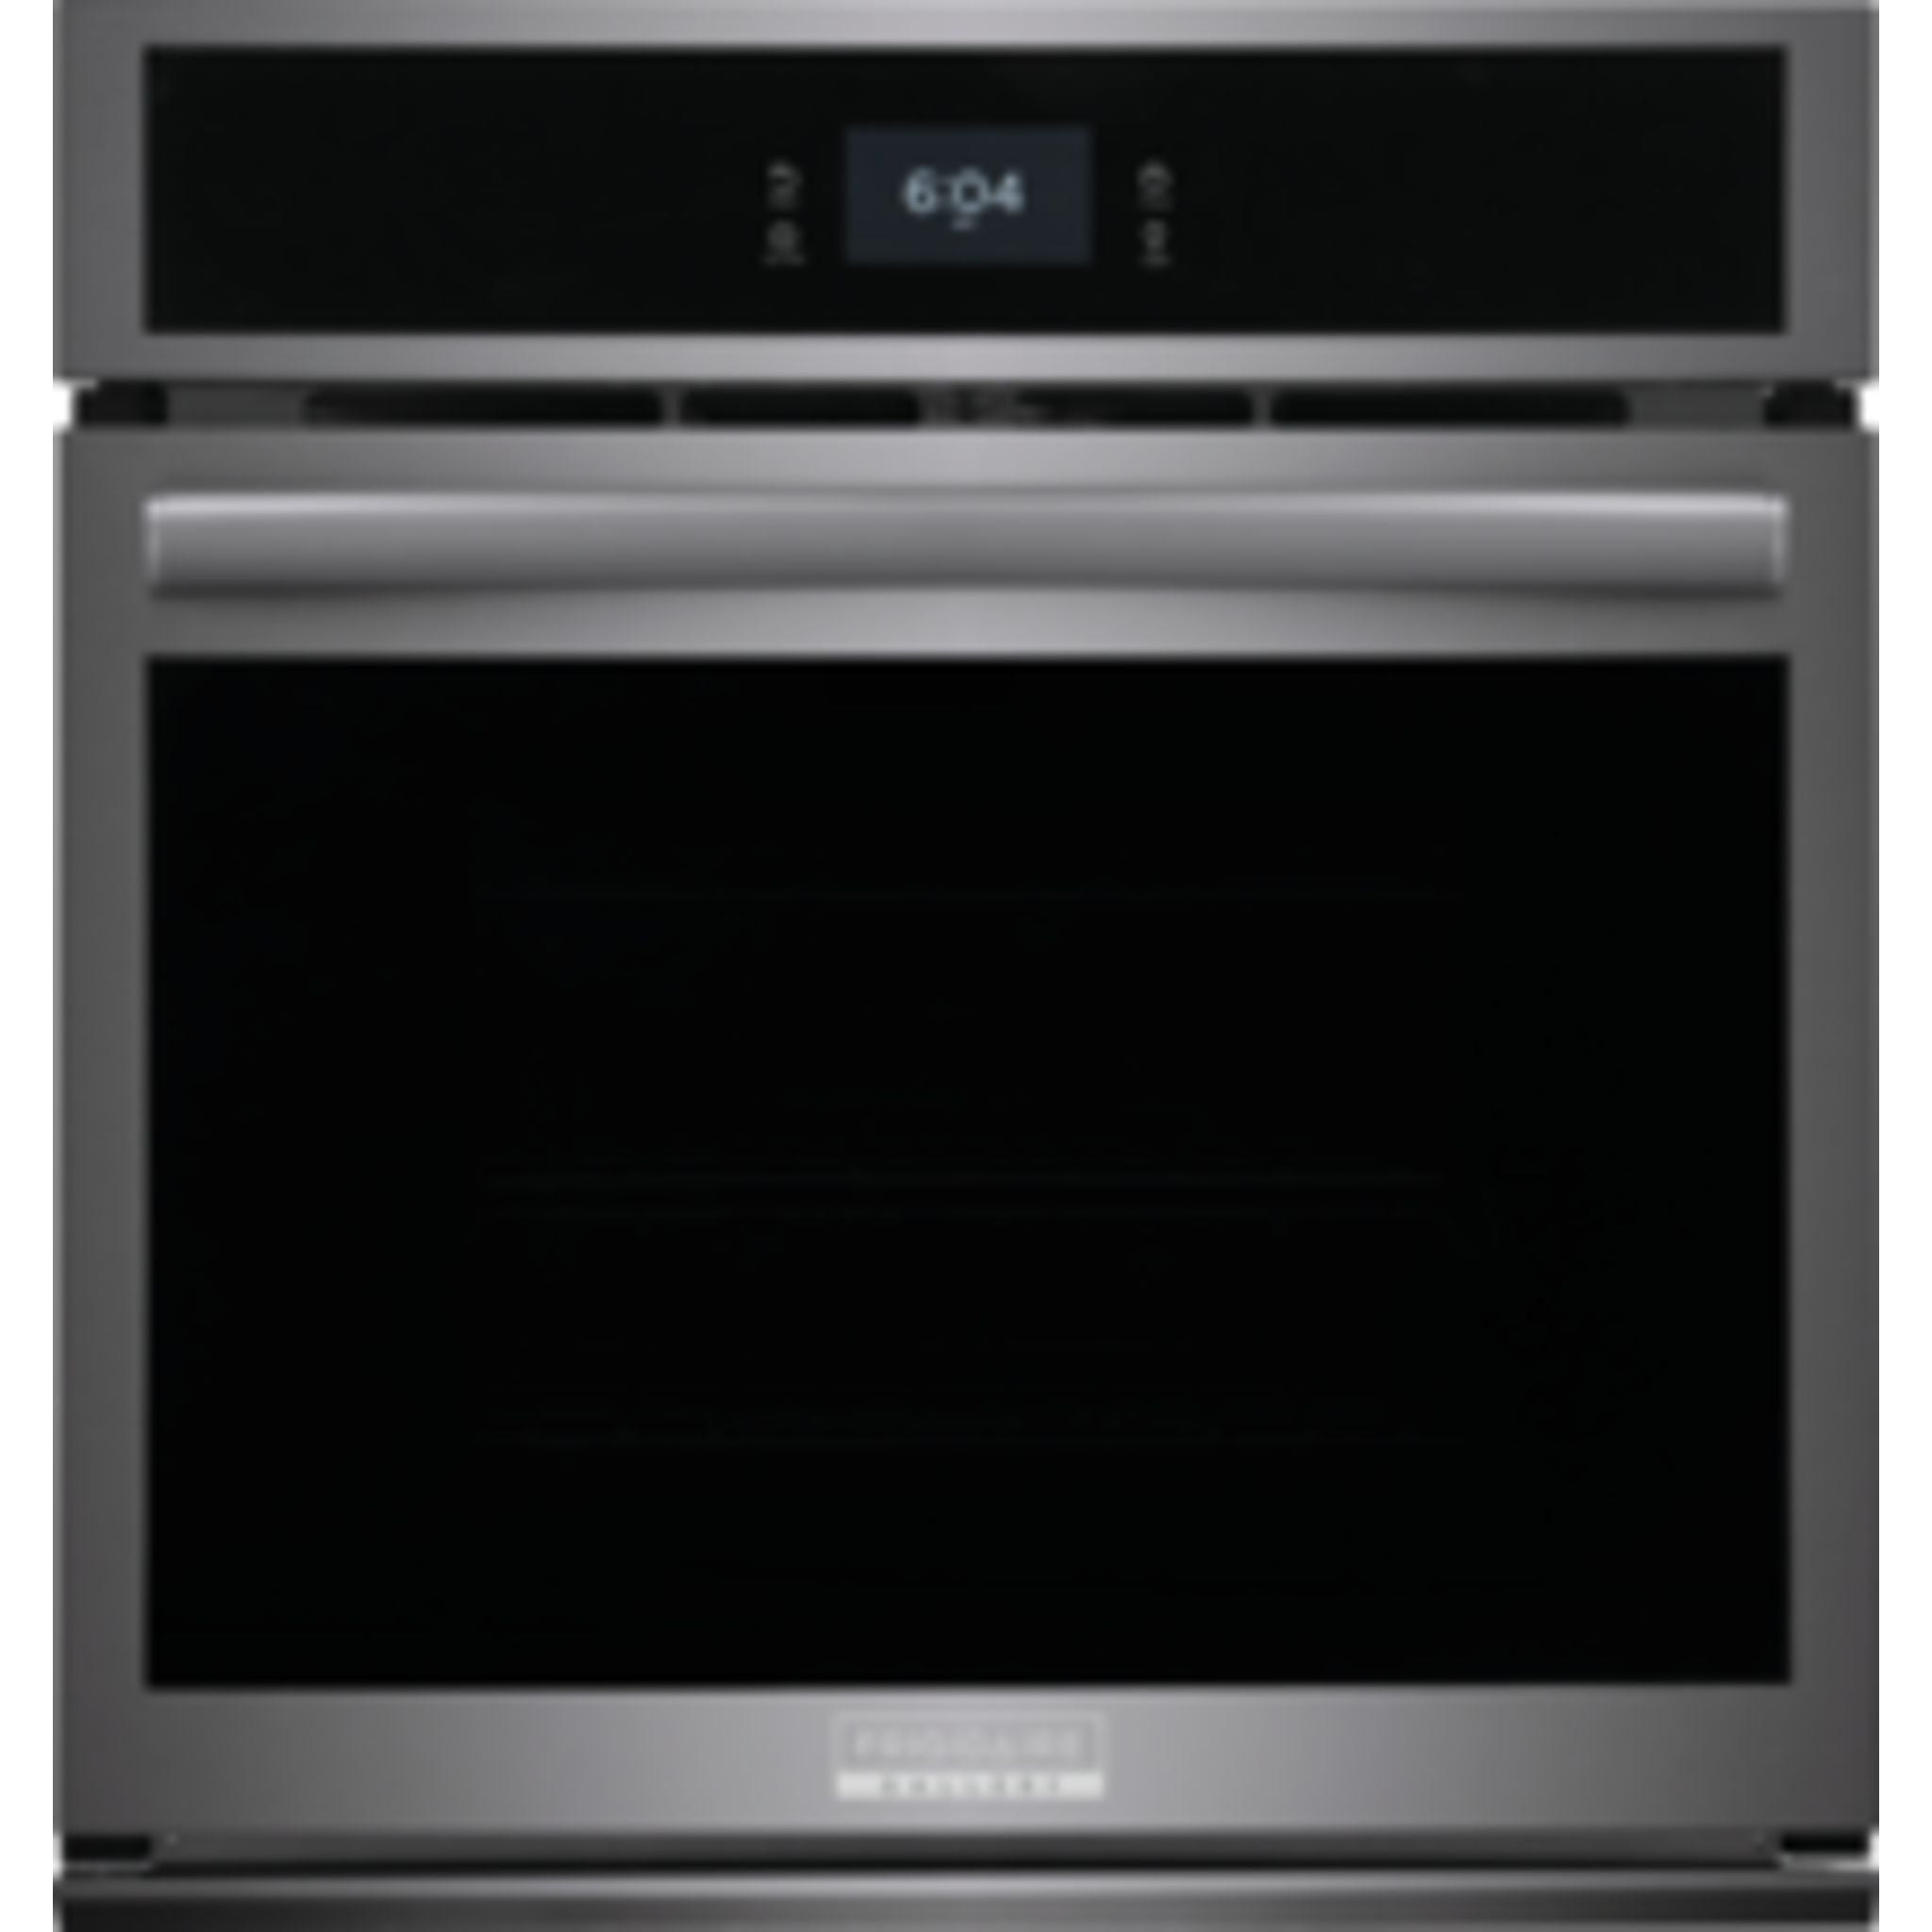 Frigidaire Gallery, Frigidaire Gallery 27" Convection Wall Oven (GCWS2767AD) - Black Stainless